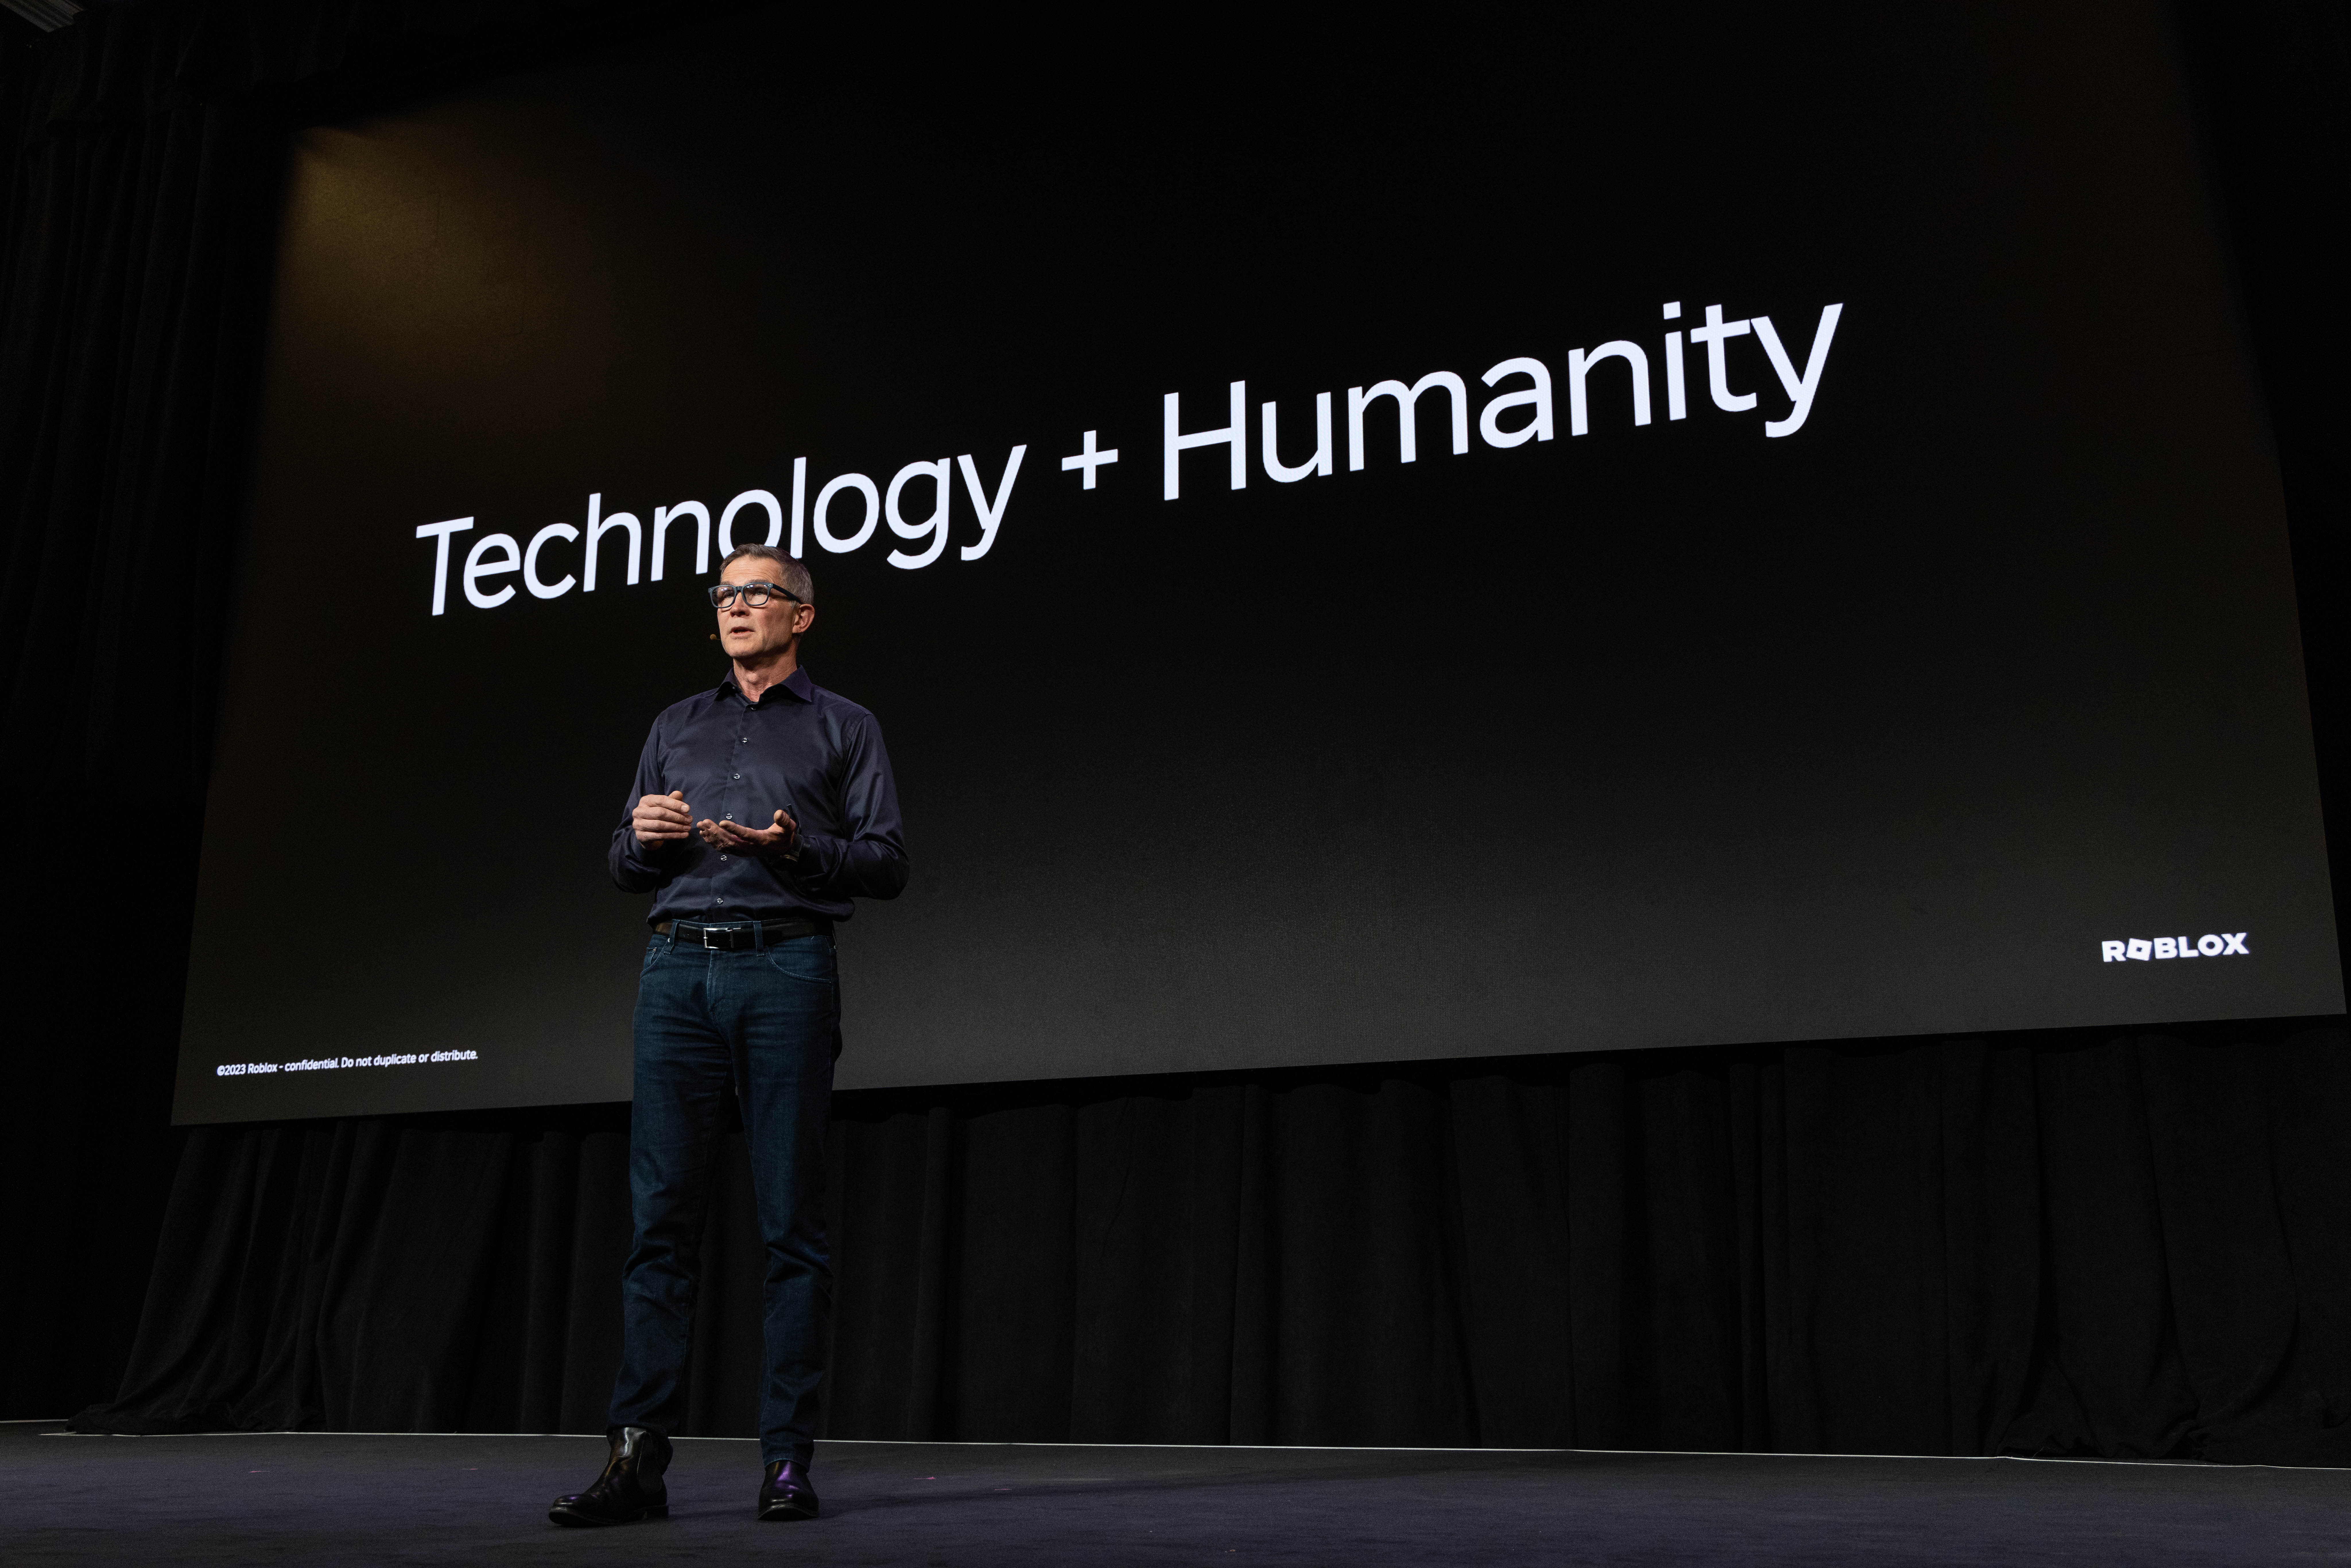 David standing on stage in front of a slide that says Technology + Humanity